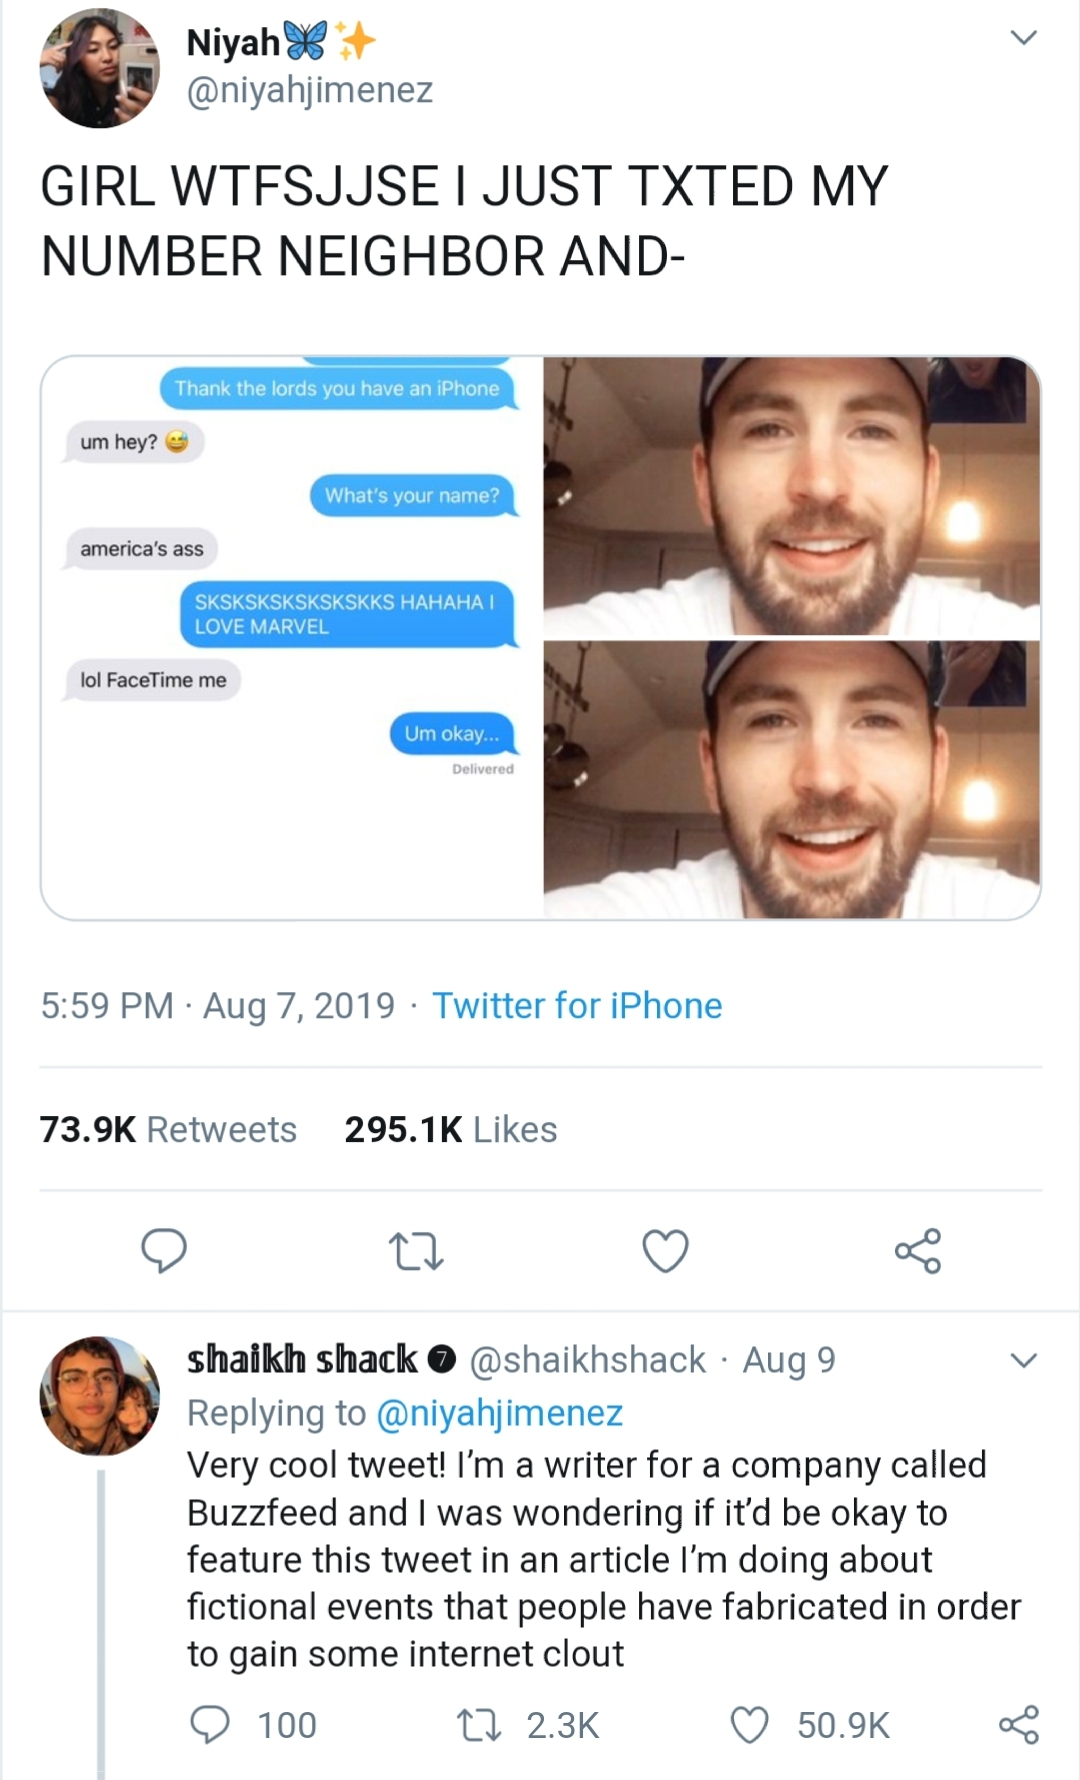 number neighbor chris evans - Niyah Girl Wtfsjjse I Just Txted My Number Neighbor And O Me . Twitter for iPhone shaikh shack @ . Aug 9 Very cool tweet! I'm a writer for a company called Buzzfeed and I was wondering if it'd be okay to feature this tweet in